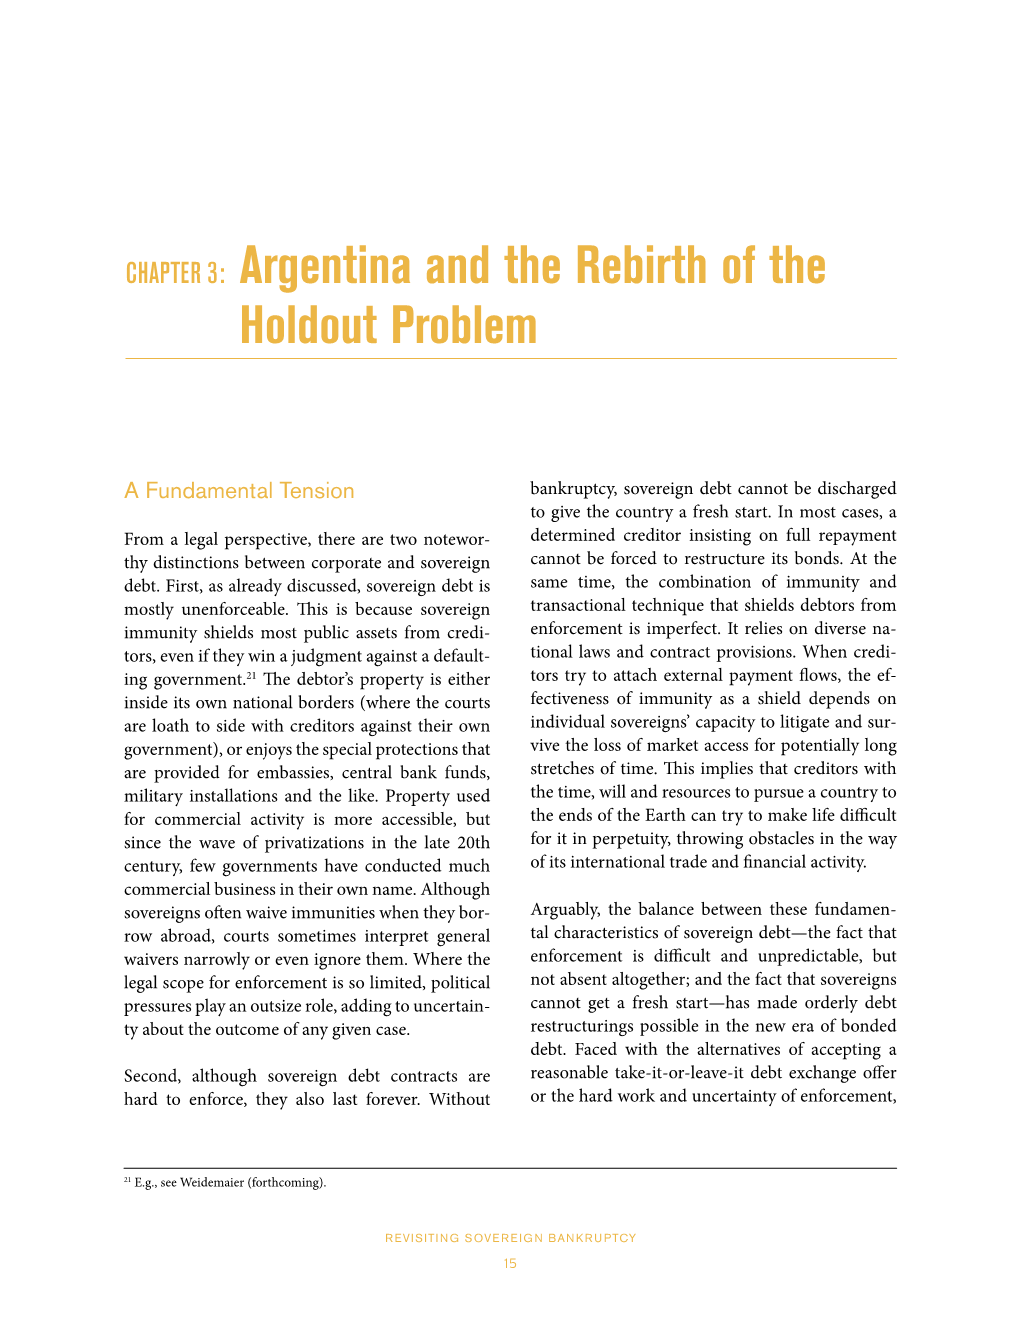 CHAPTER 3: Argentina and the Rebirth of the Holdout Problem